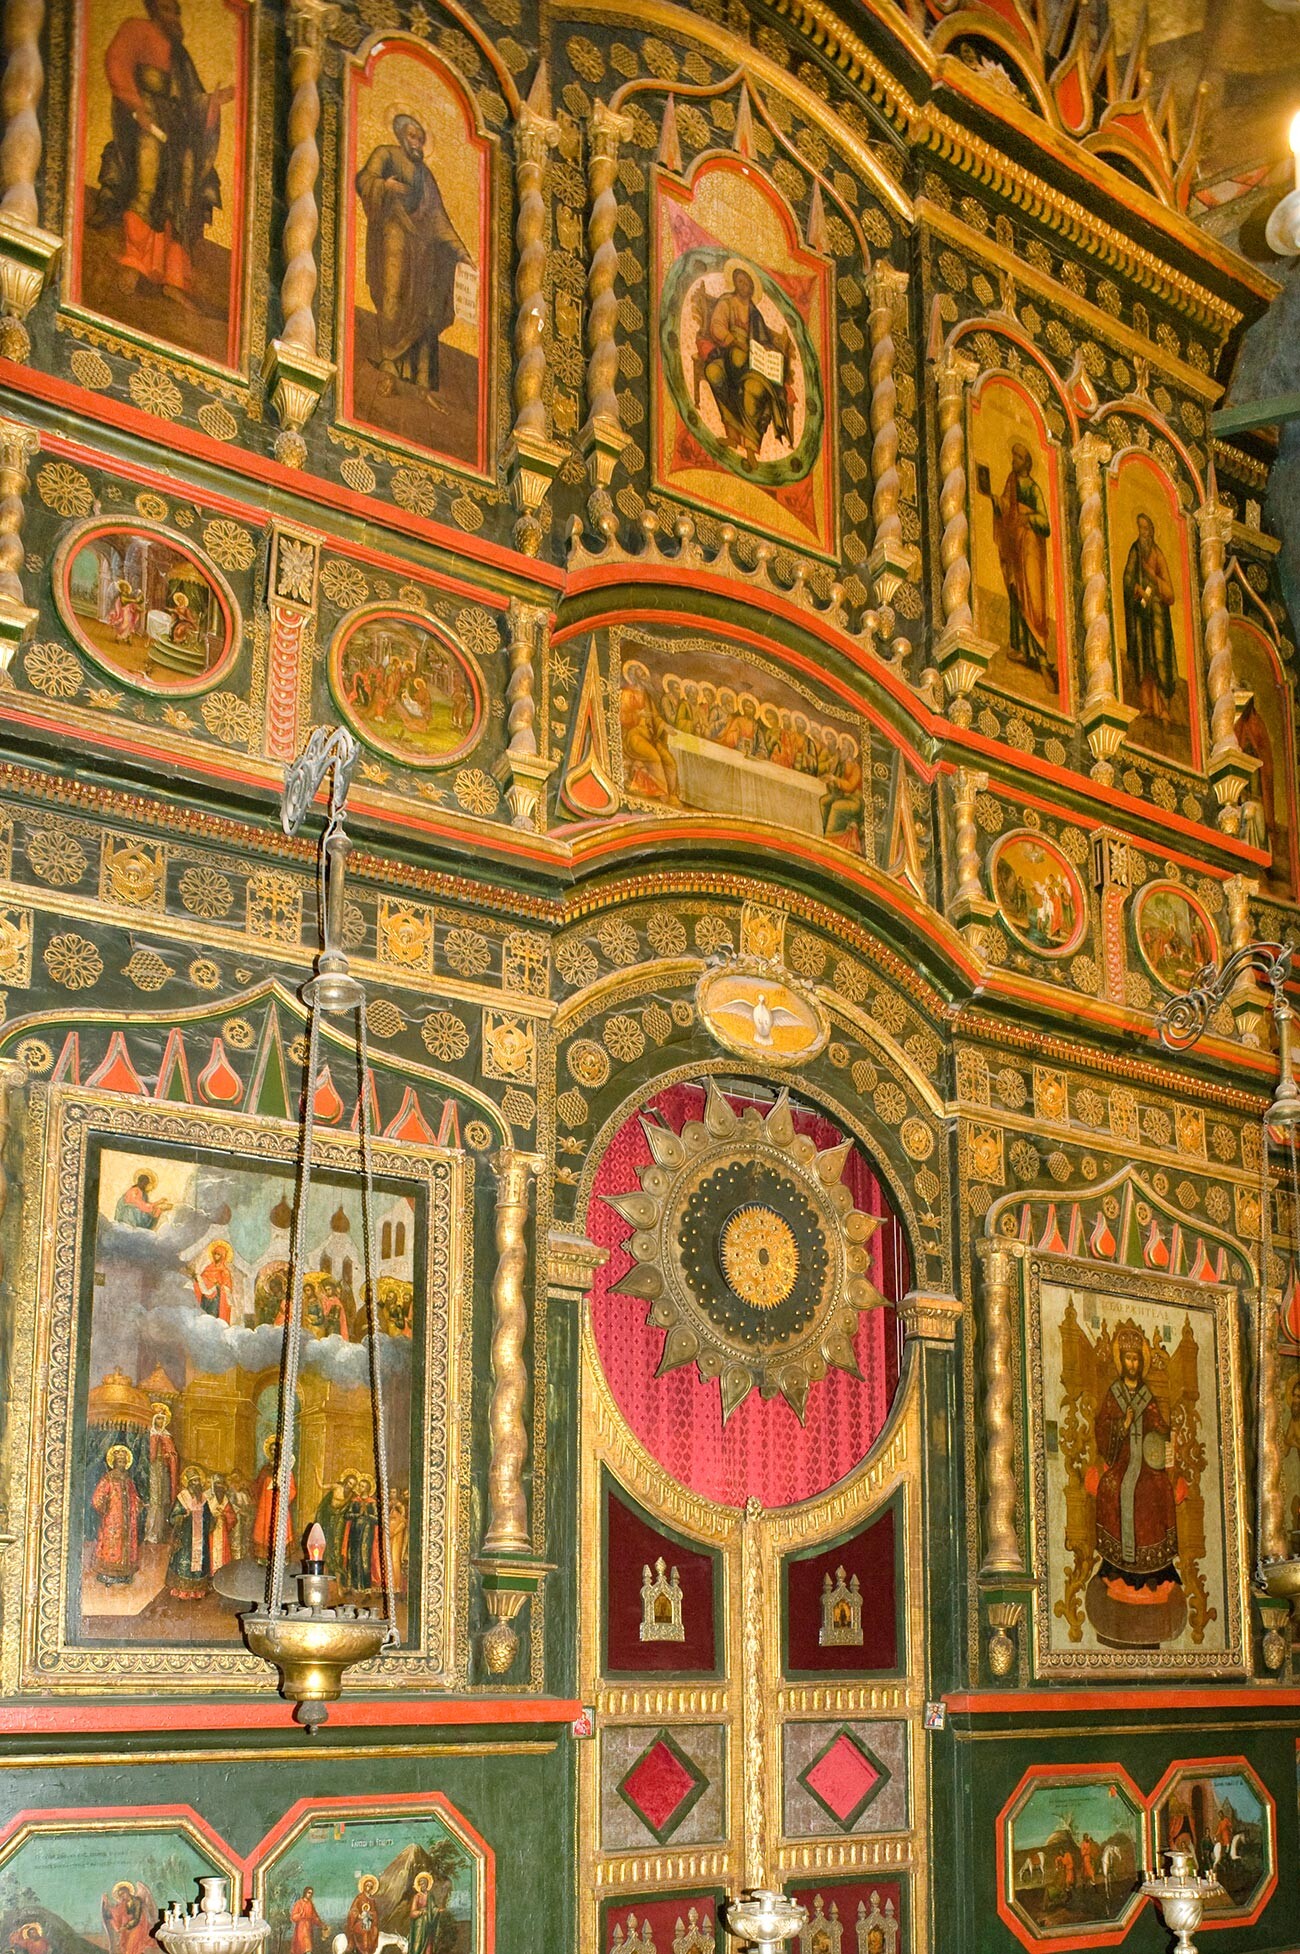 St. Basil's, Church of the Intercession. 18th-century icon screen with icon of the Intercession (left). June 2, 2012